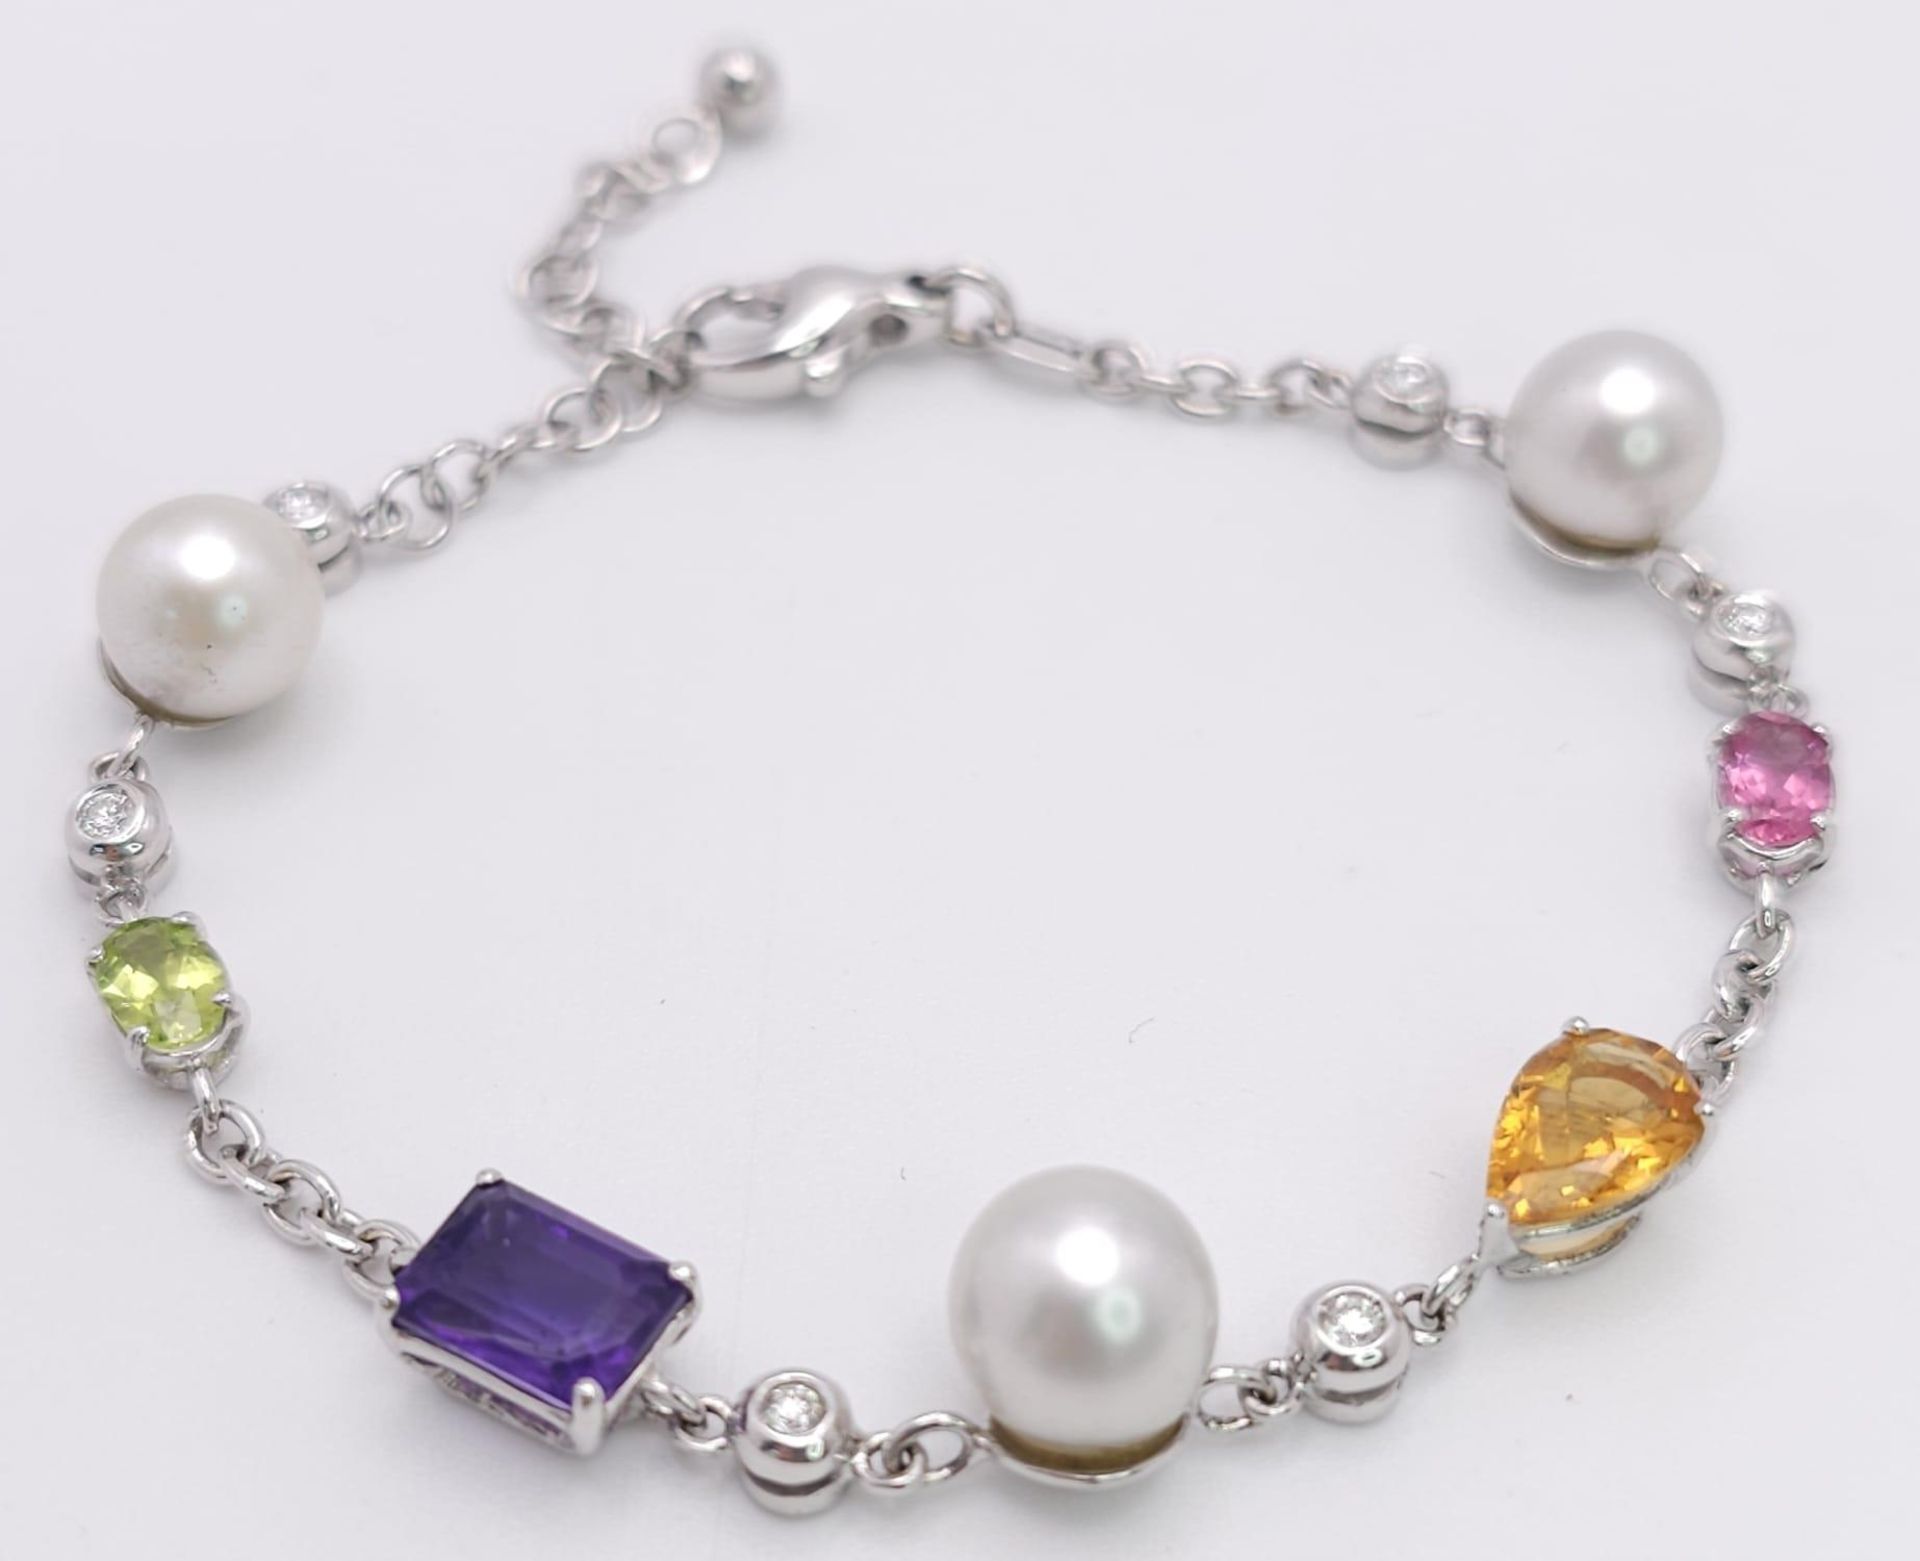 An 18 K white gold chain bracelet with a variety of gemstones (peridot, amethyst, citrine, etc) - Image 2 of 6